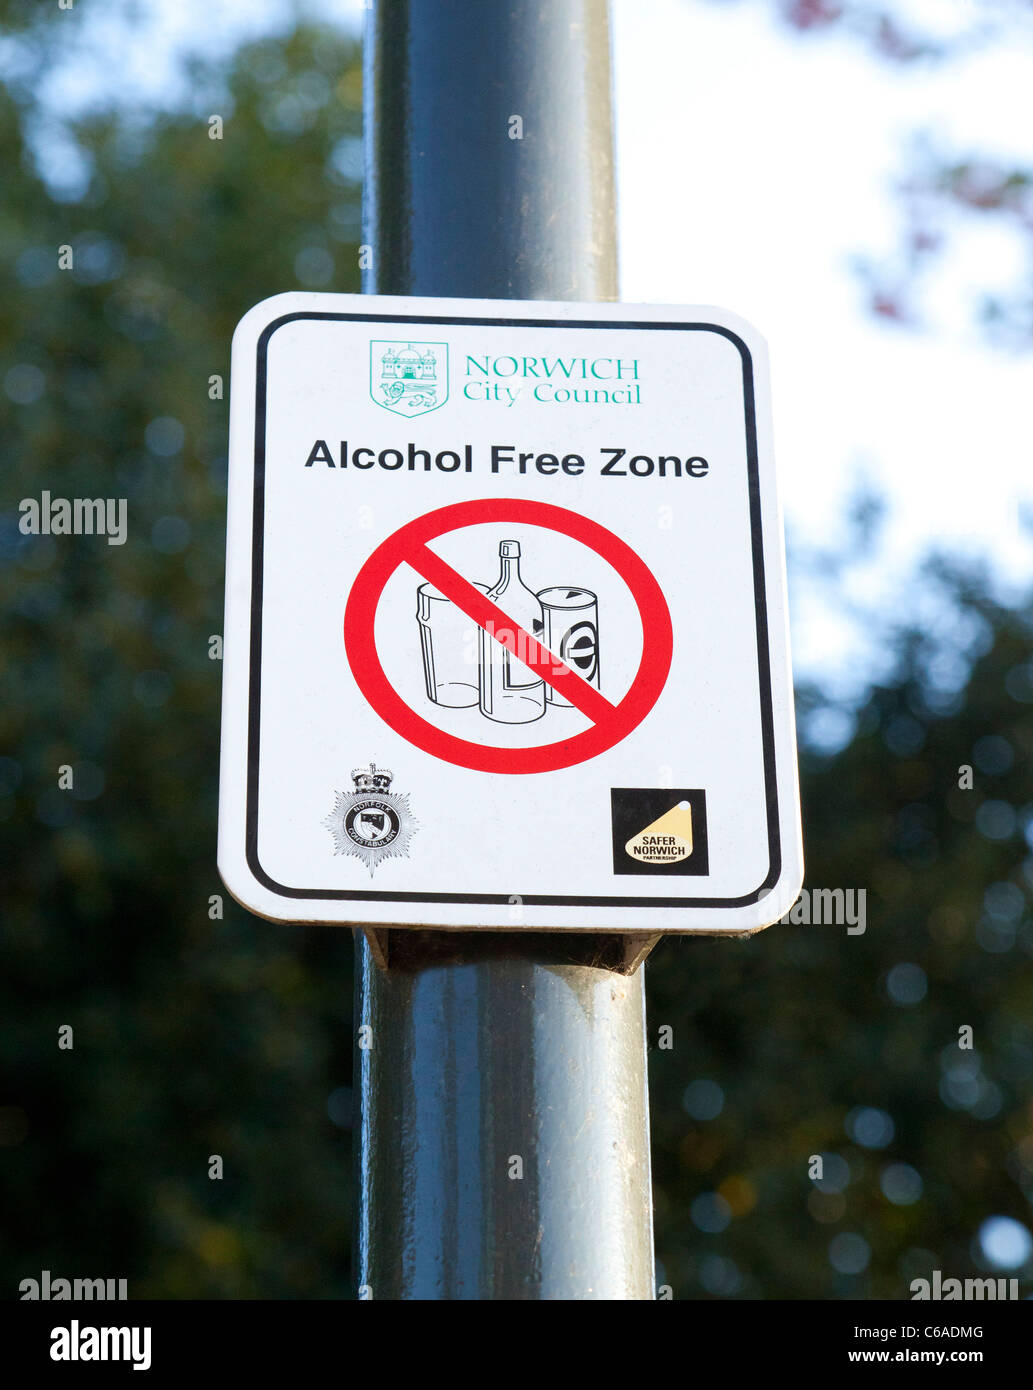 Alcohol free zone sign in Norwich, UK Stock Photo